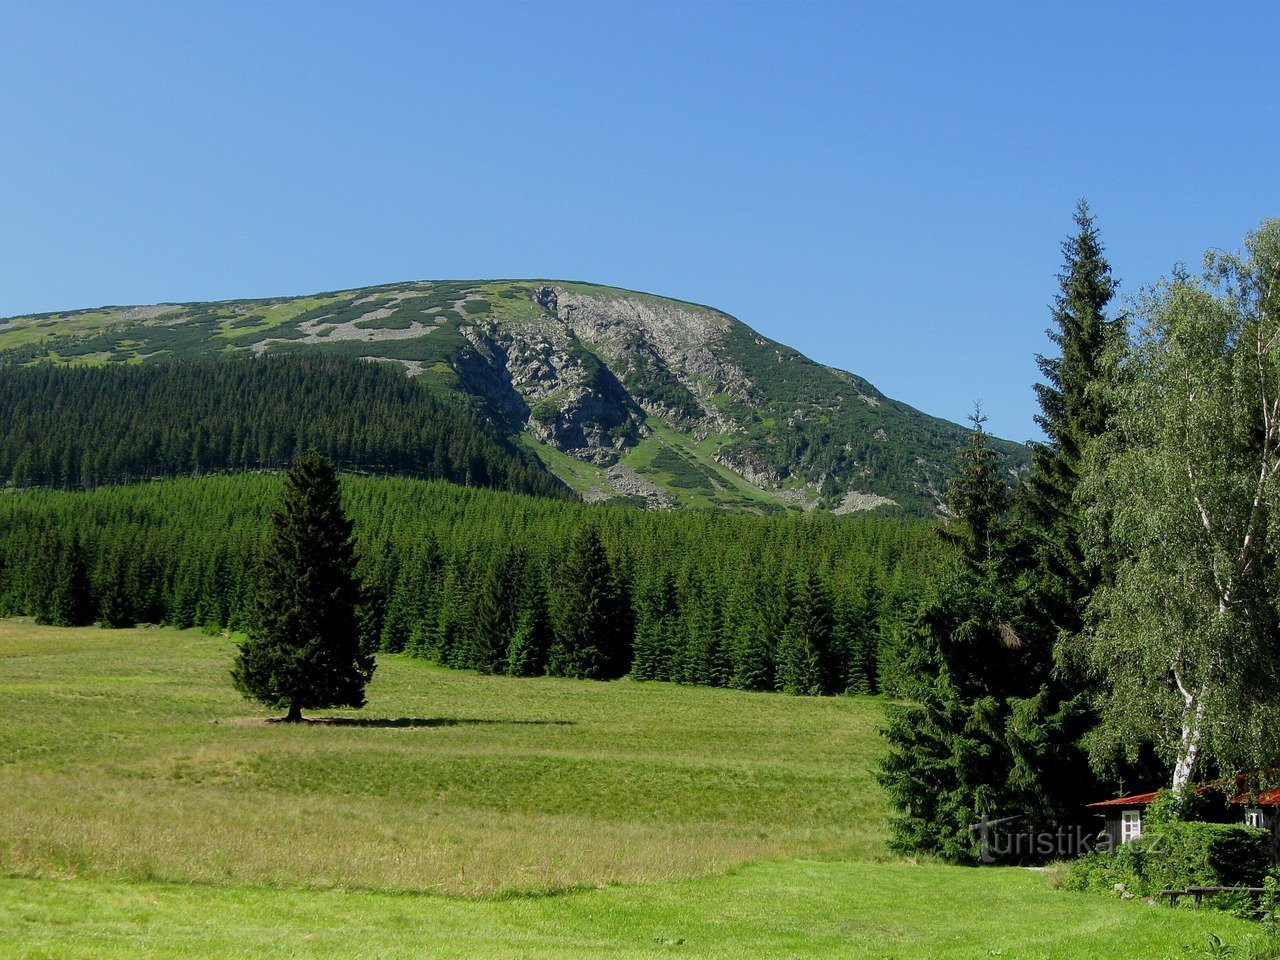 Popular locations in the Czech Republic for a summer family vacation